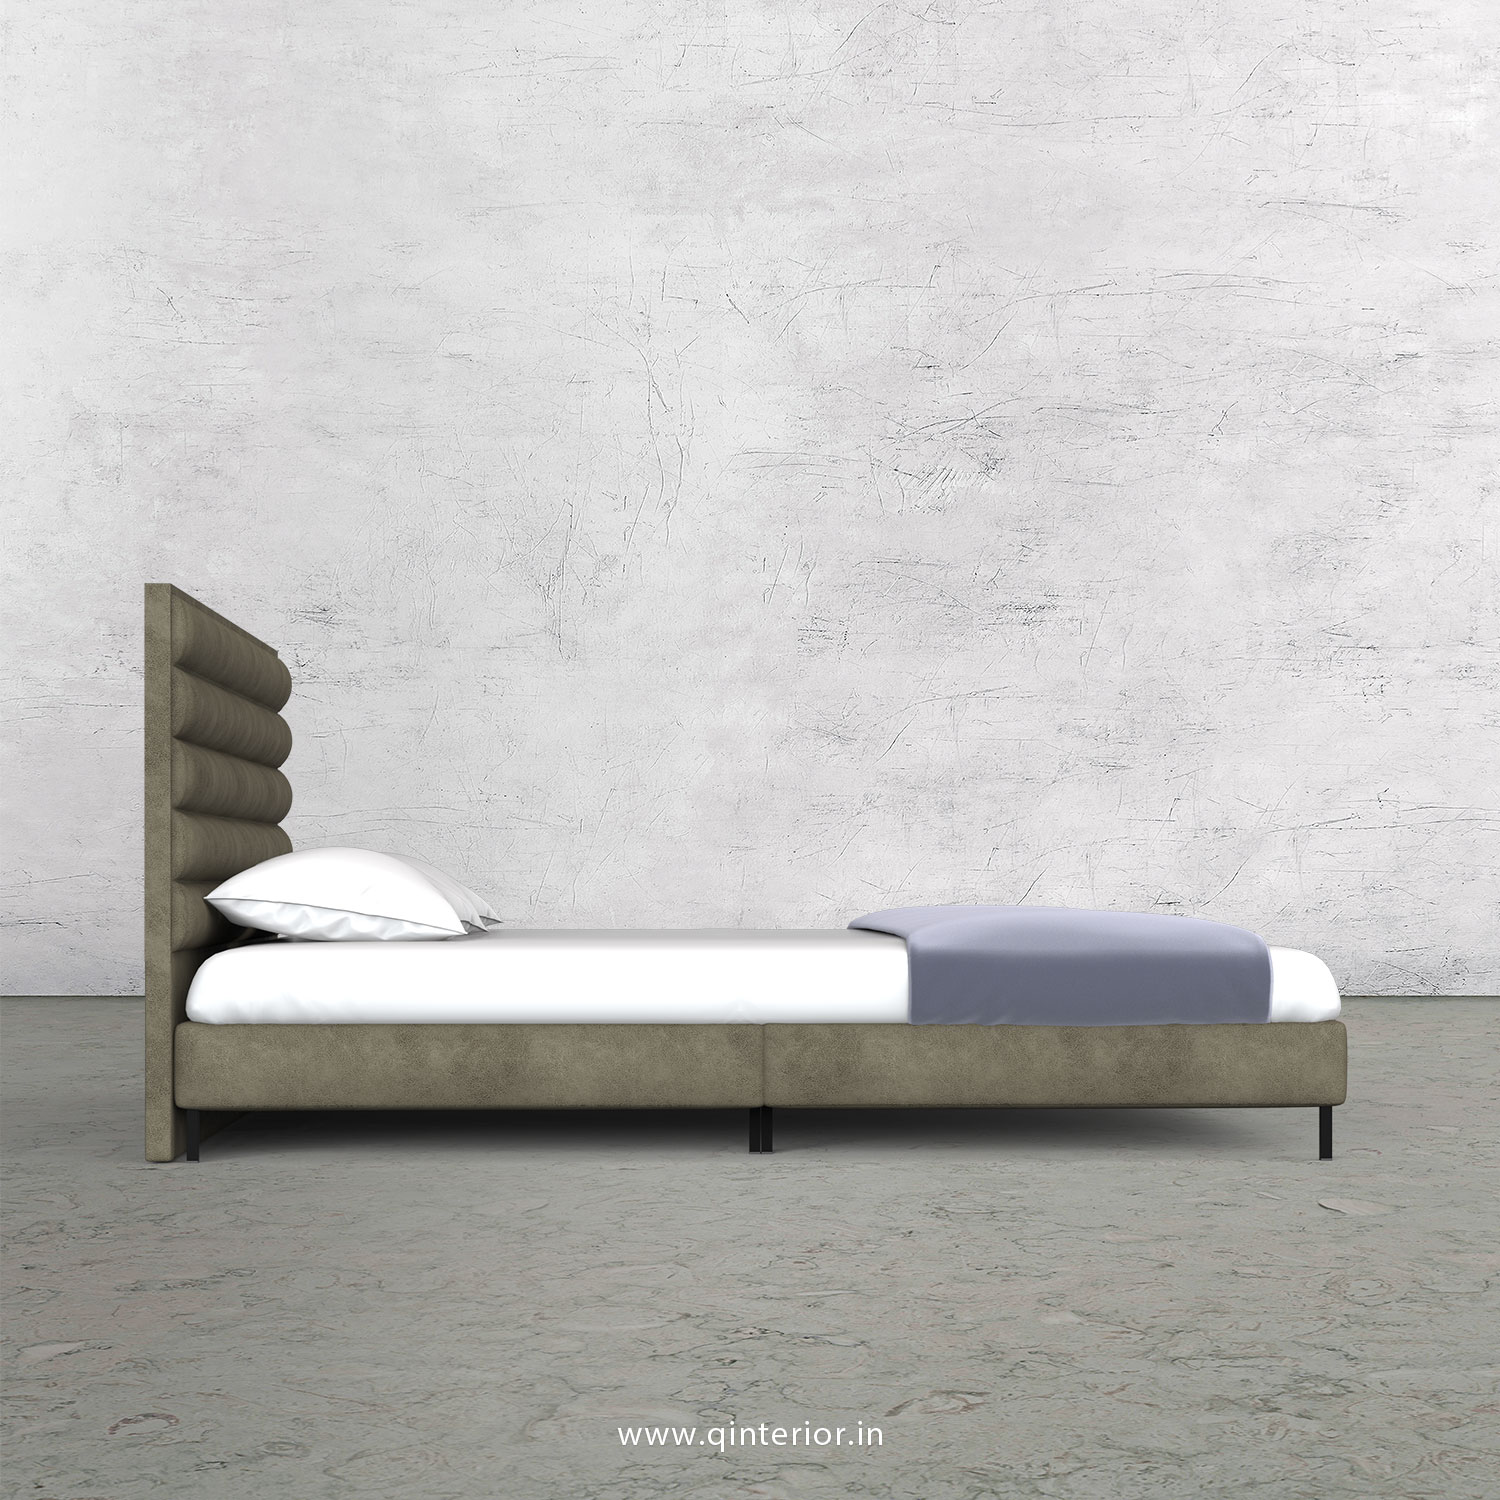 Crux King Size Bed in Fab Leather Fabric - KBD003 FL03